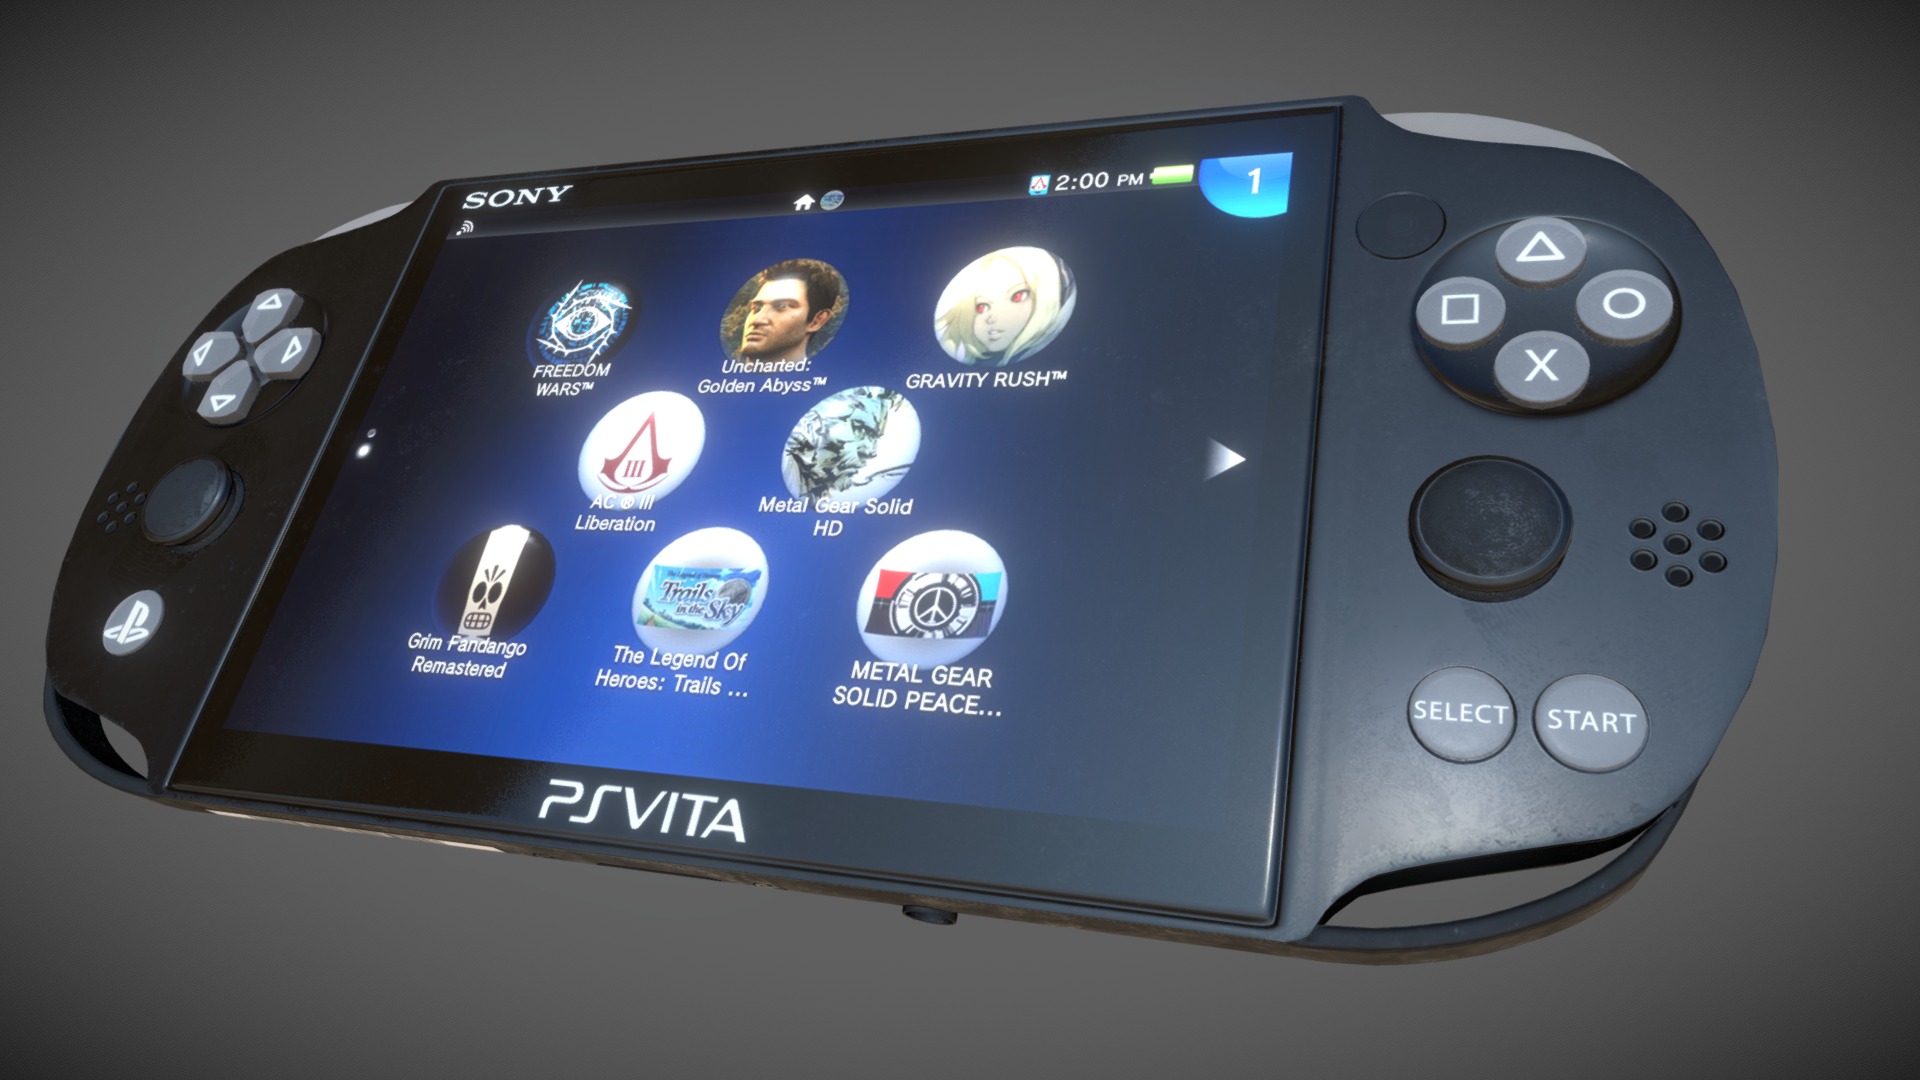 3D model Playstation Vita - This is a 3D model of the Playstation Vita. The 3D model is about a black rectangular device with a screen.